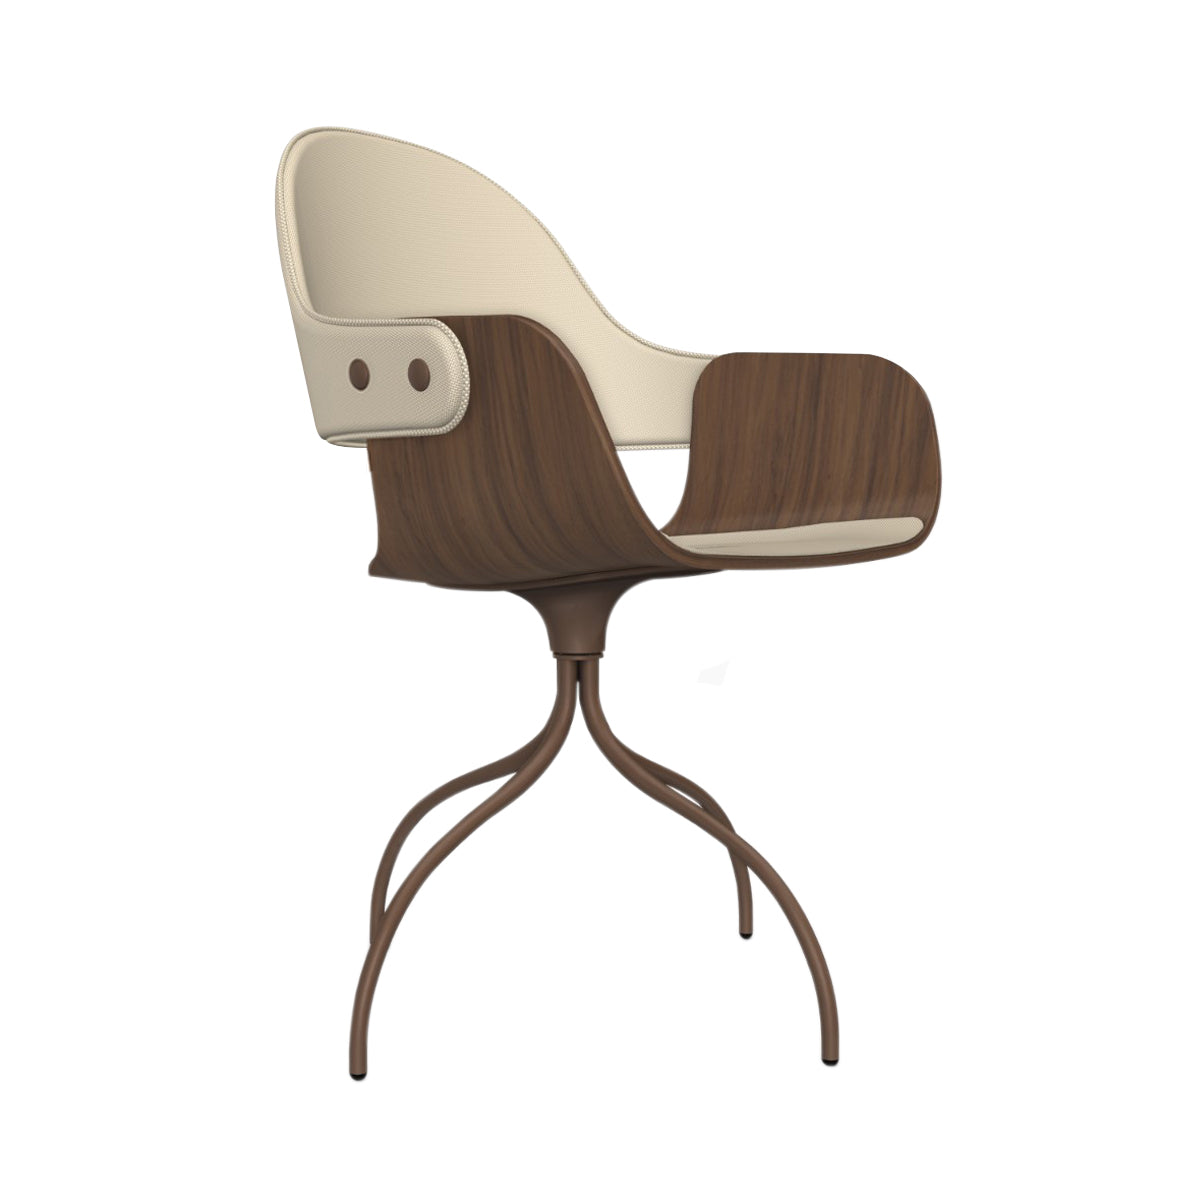 Showtime Nude Chair with Swivel Base: Seat + Backrest Upholstered + Walnut + Pale Brown